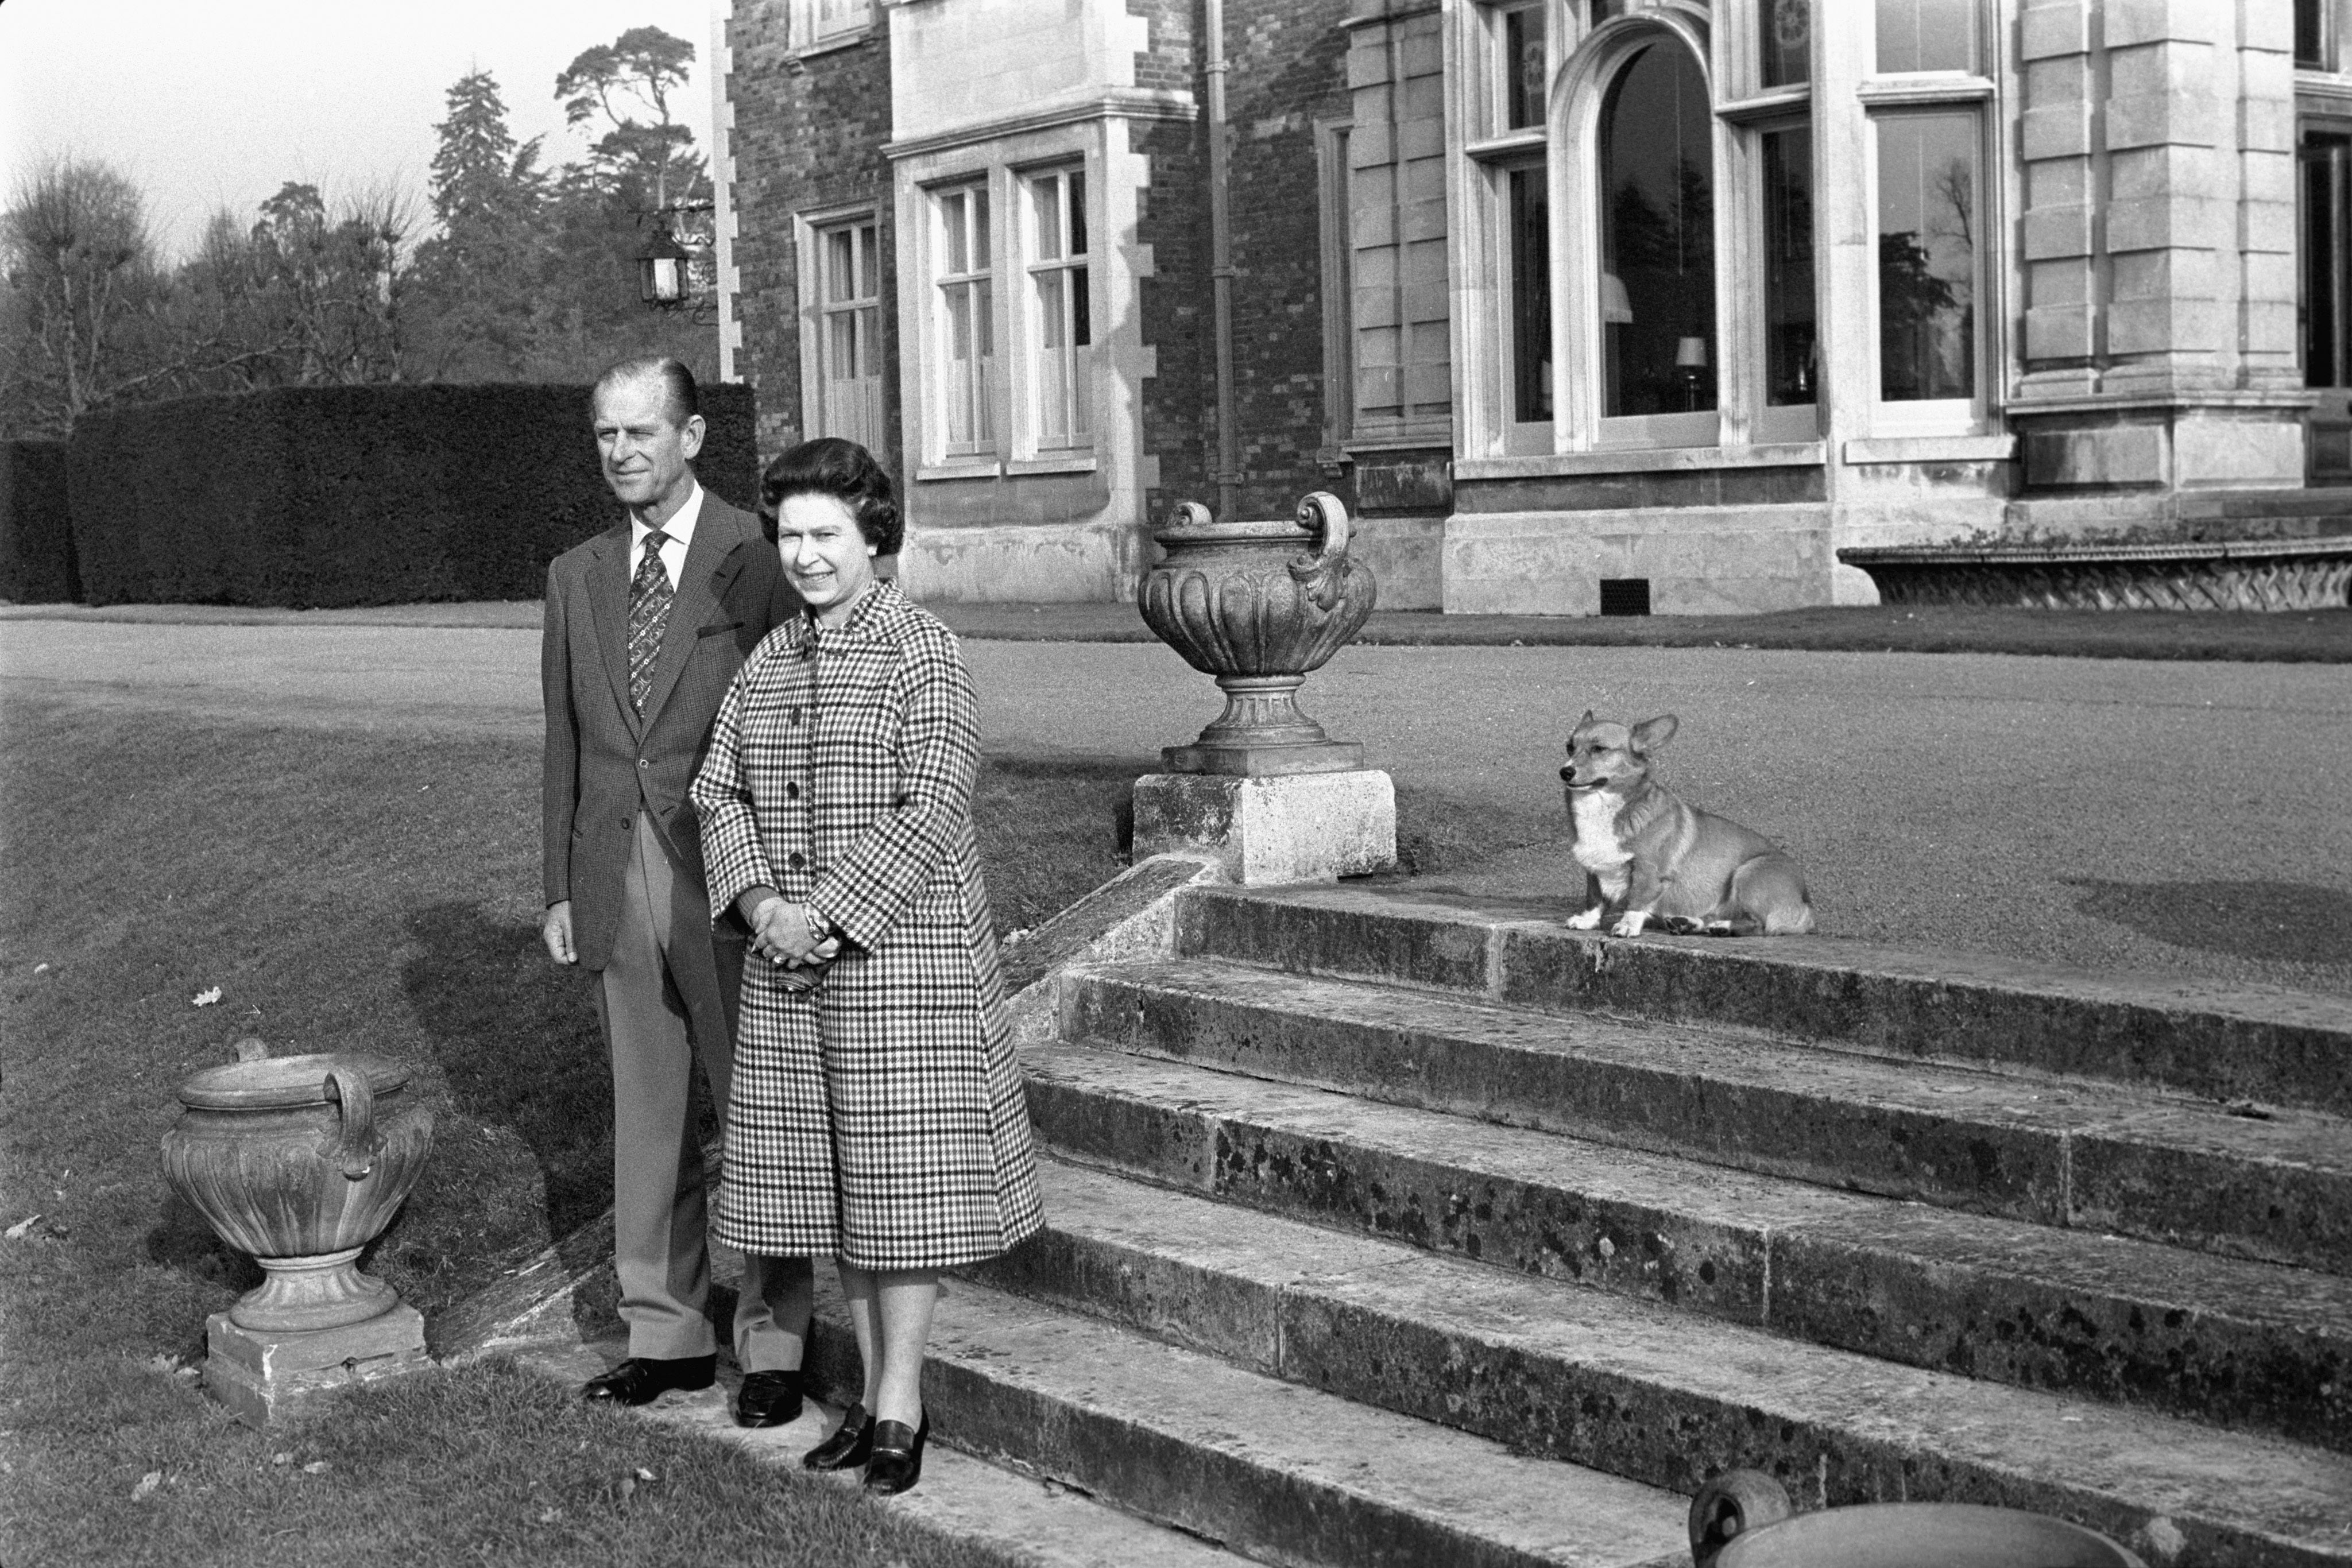 The Queen and the Duke of Edinburgh posing in the grounds of Sandringham House, Norfolk, to mark the 30th anniversary of the Queen’s accession to the throne (Ron Bell/PA)